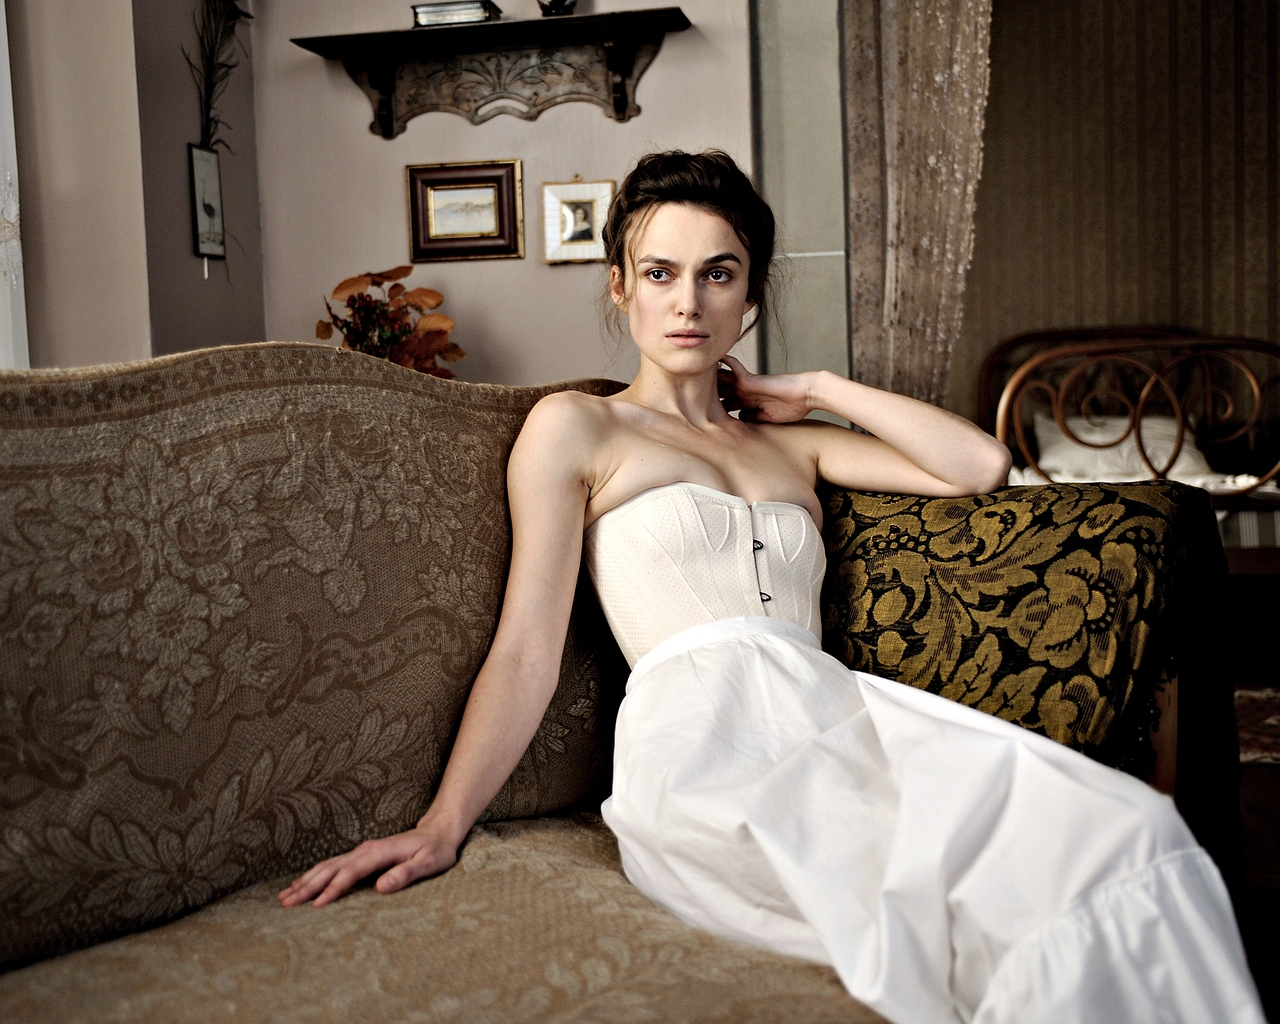 Keira Knightley A Dangerous Method for 1280 x 1024 resolution